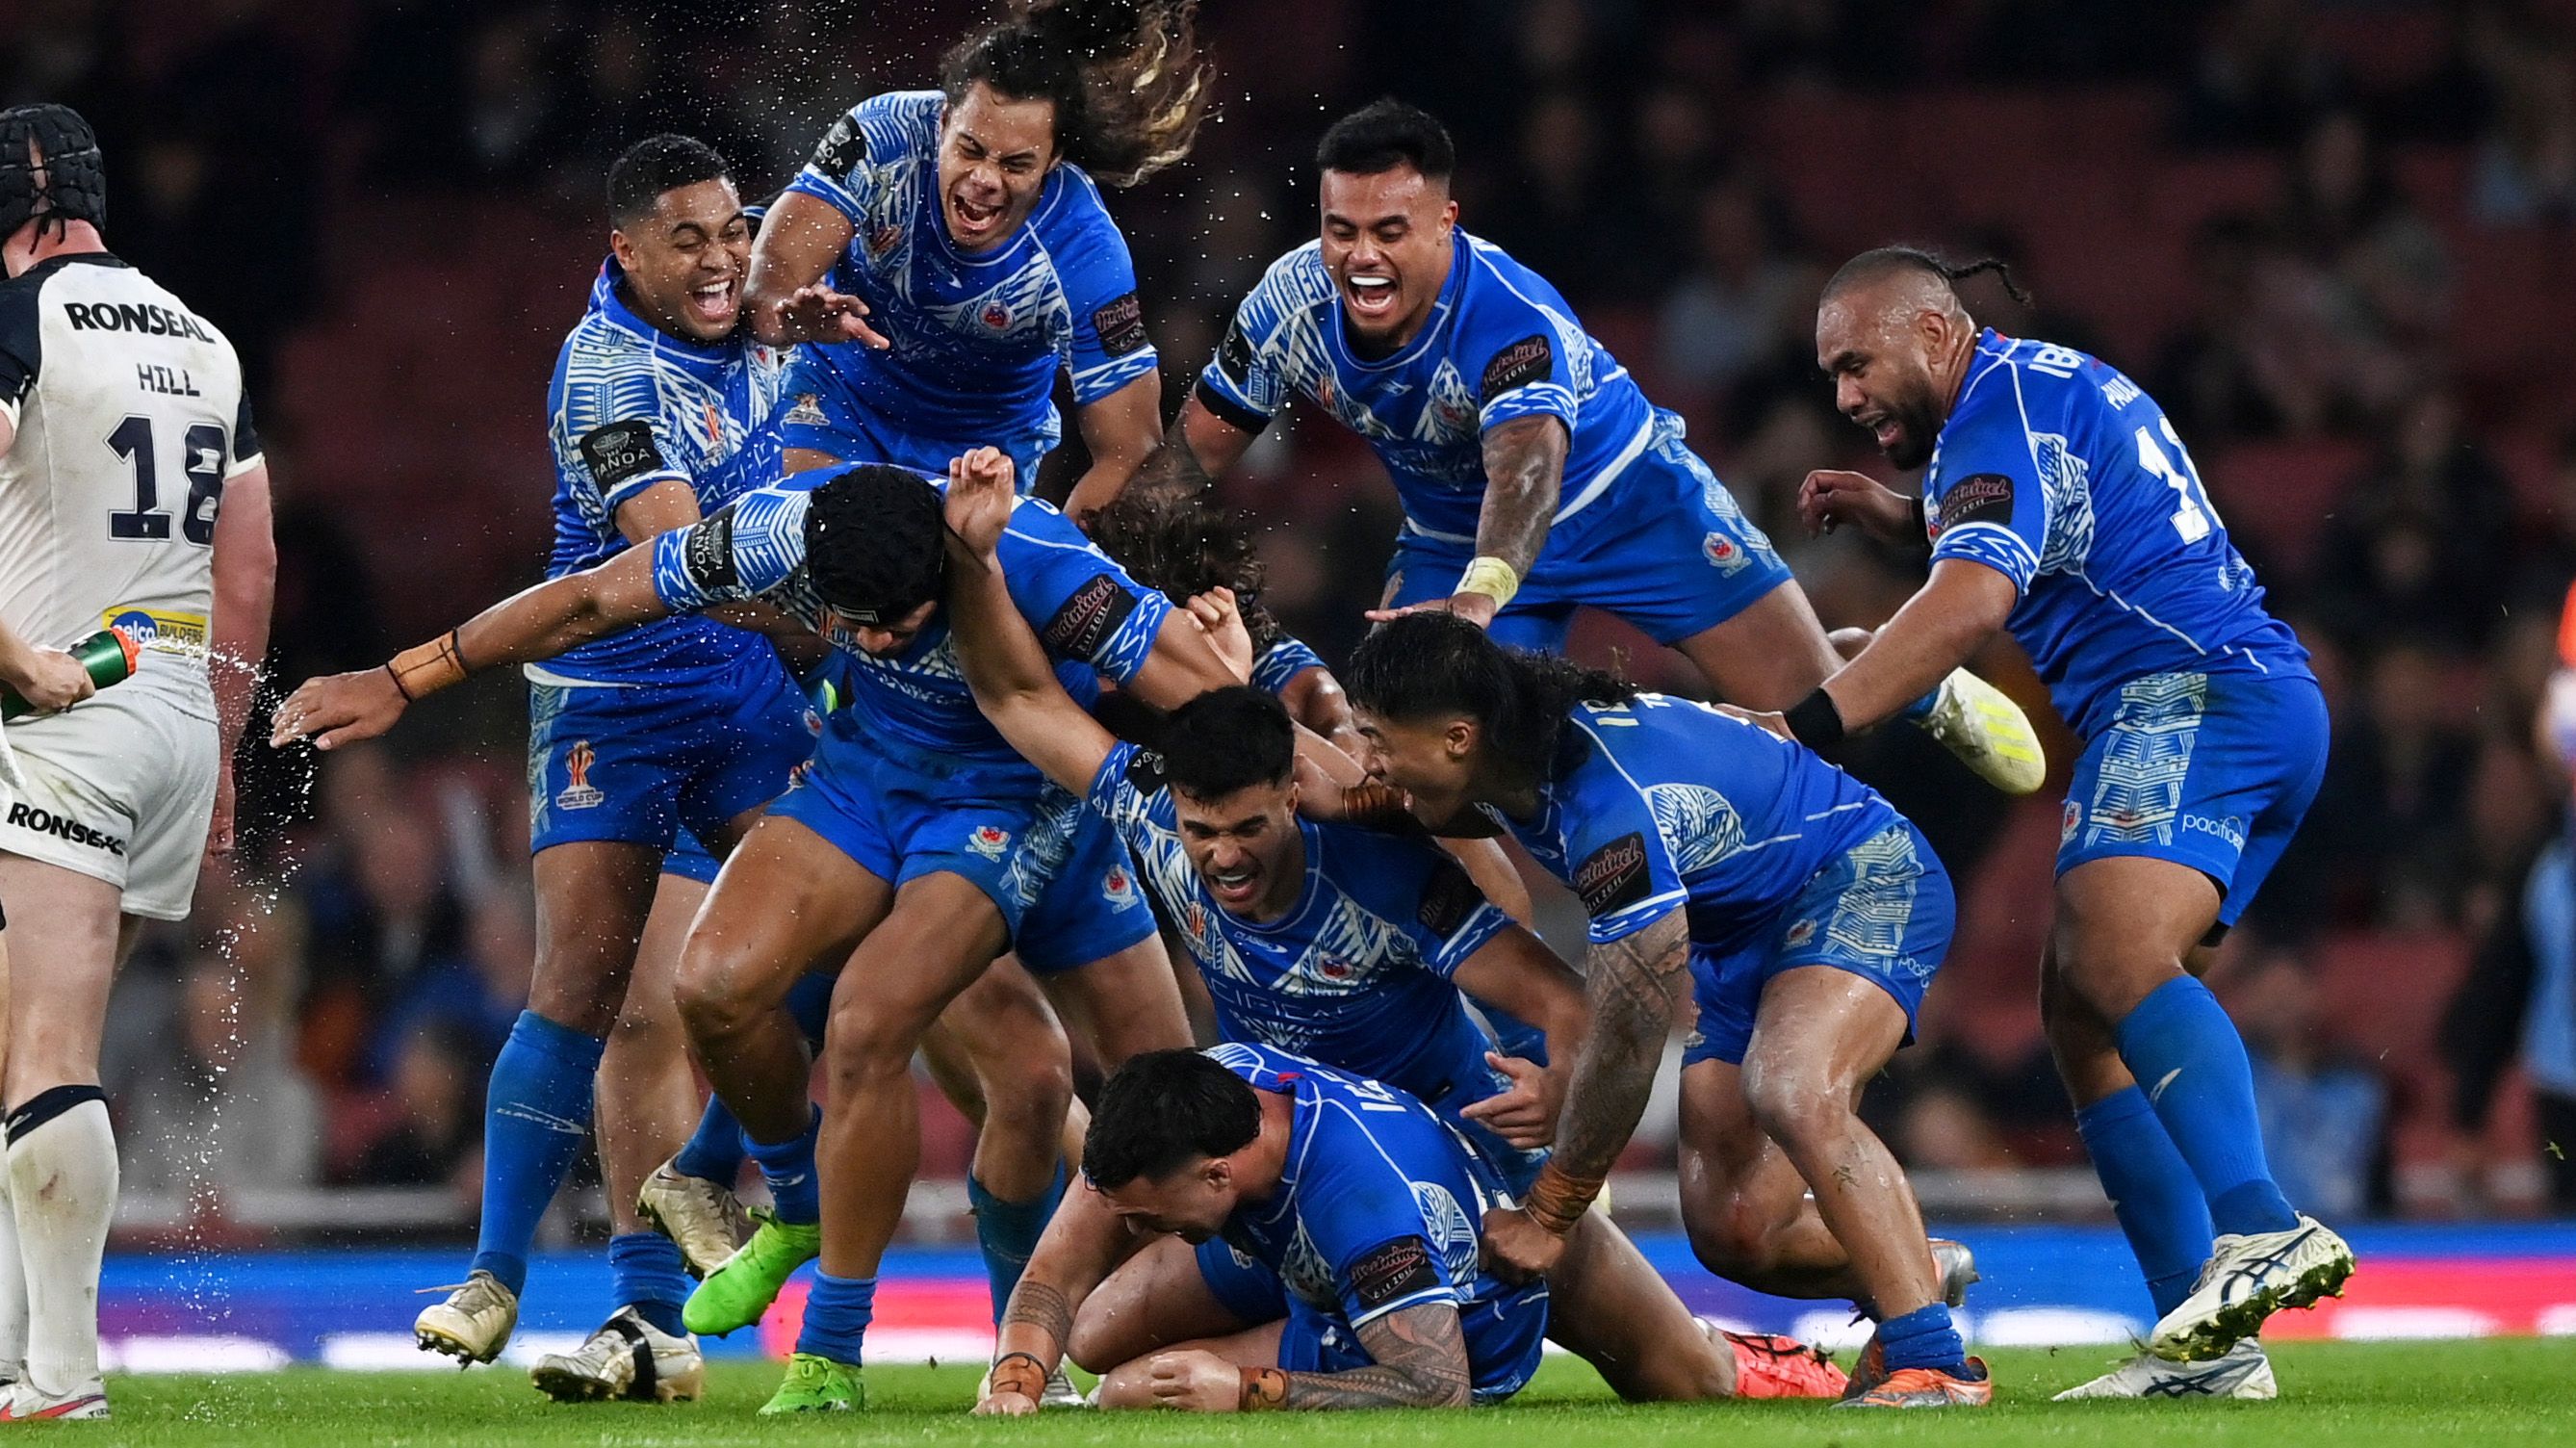 Samoa shocks England to reach first World Cup final after 84th minute golden point field goal